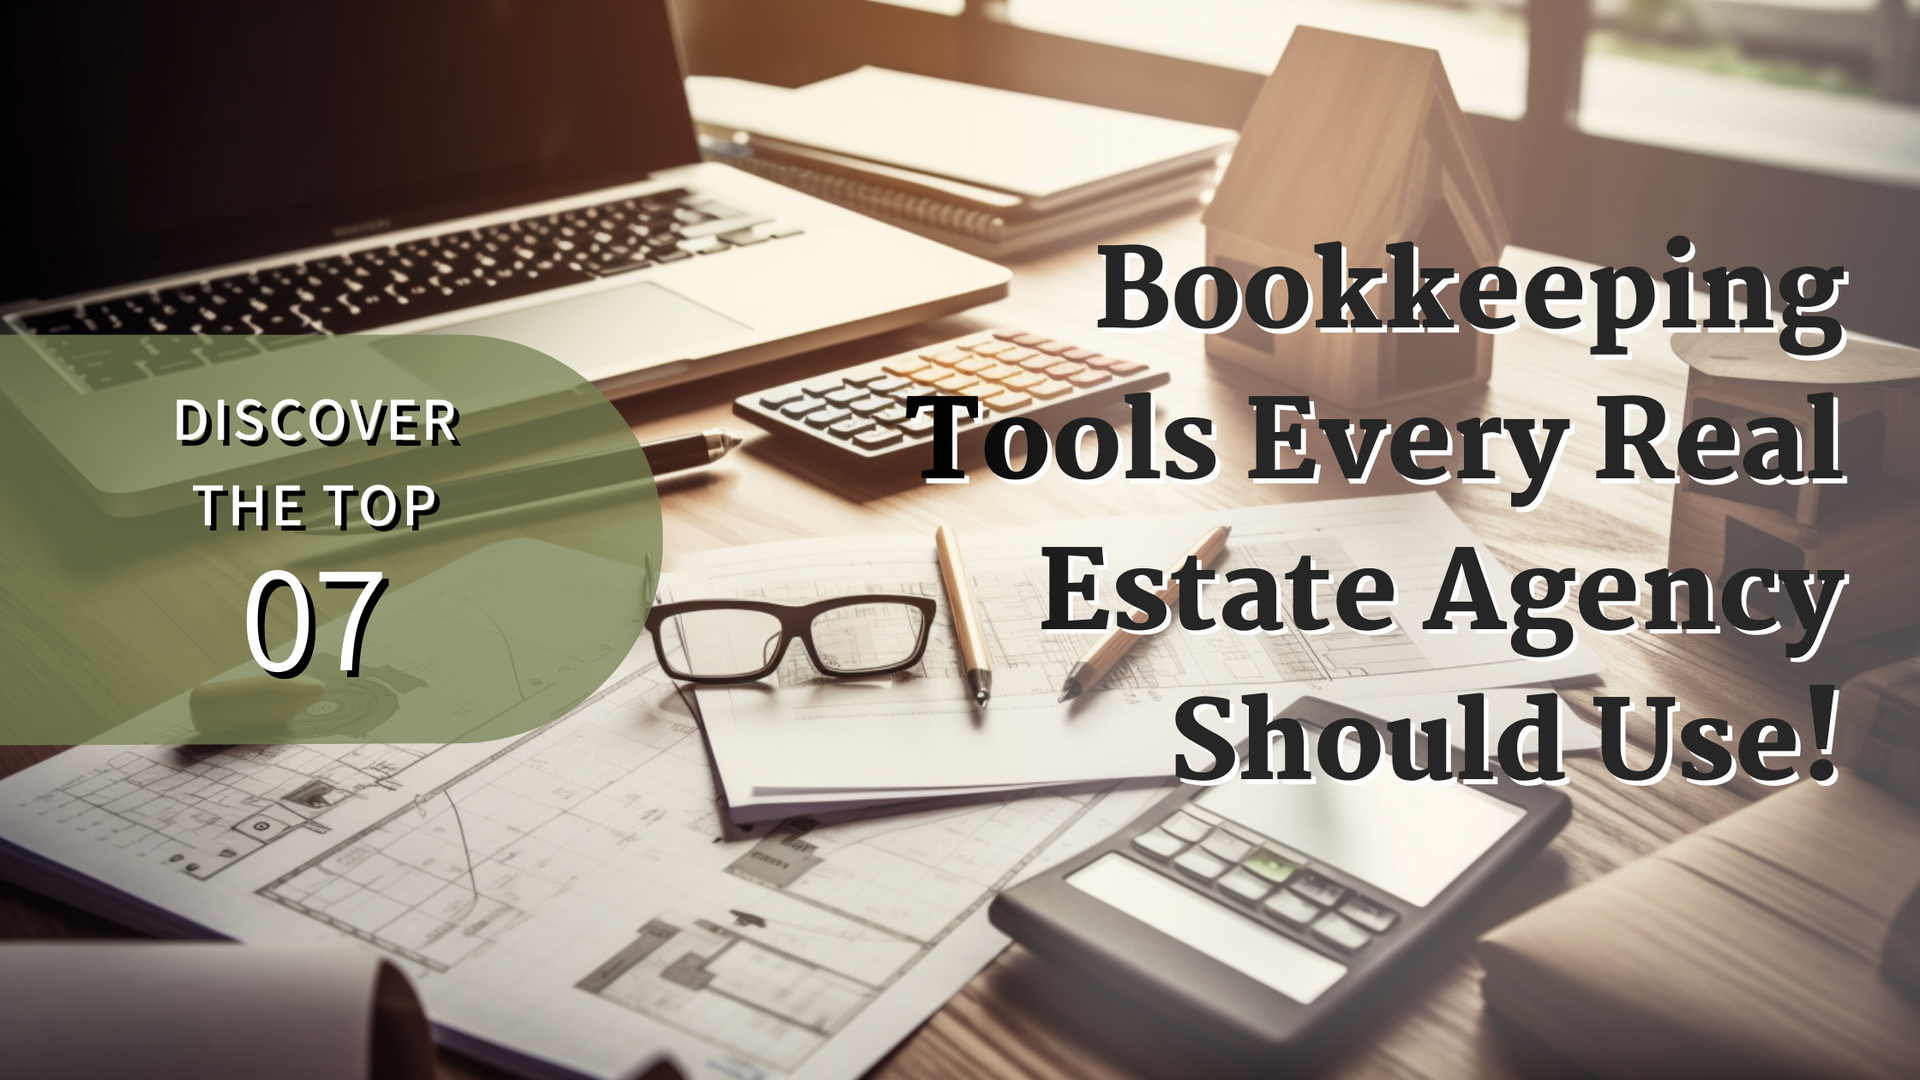 Discover-The-Top-7-Bookkeeping-Tools-Every-Real-Estate-Agency-Should-Use!